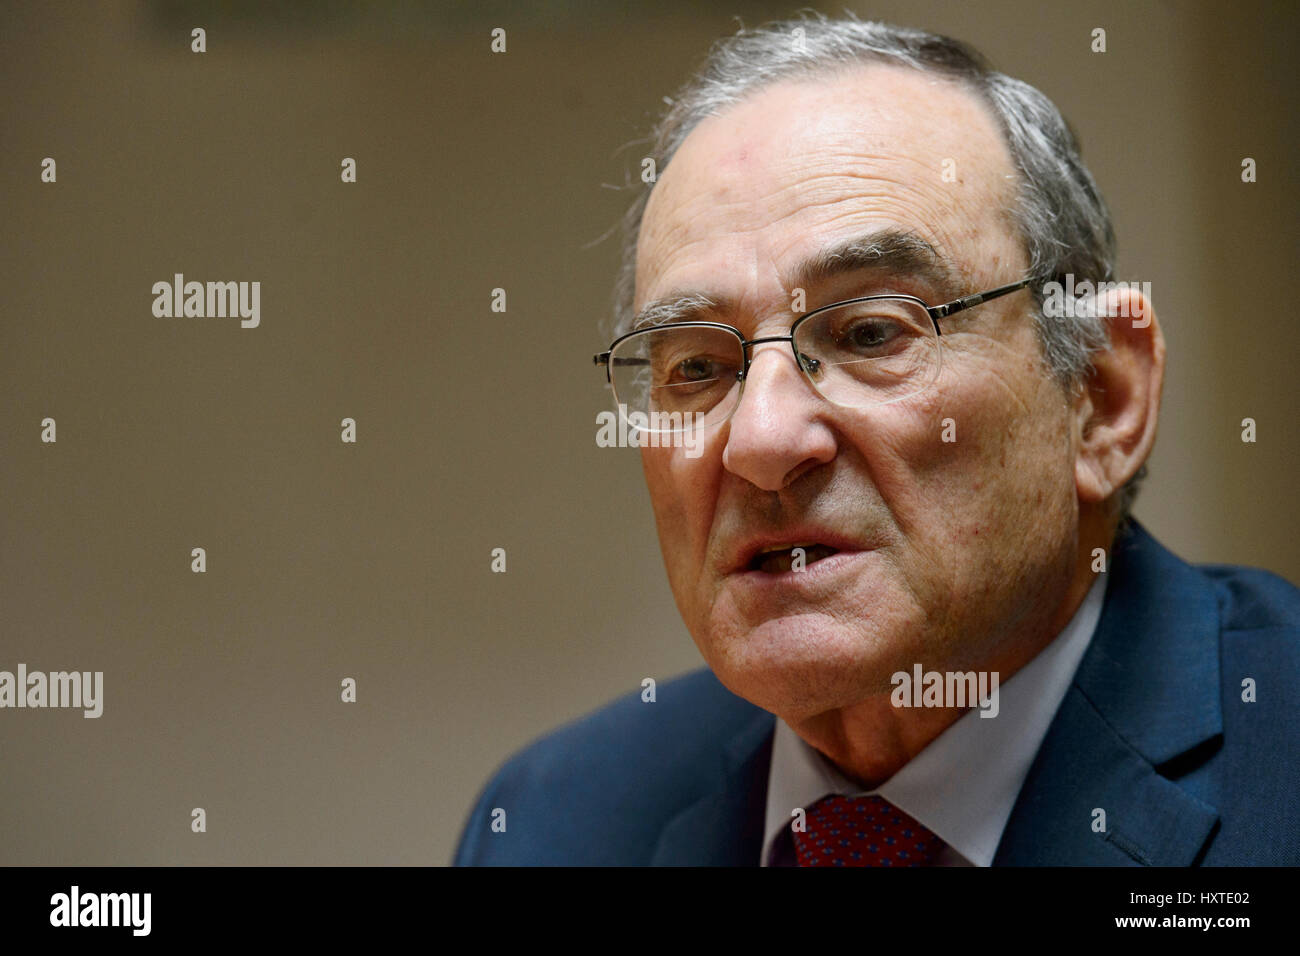 Israeli experts Eytan Gilboa attends Cyber and International Security conference in Prague. Eytan Gilboa gives an interview to CTK in Prague, Czech Republic, March 30, 2017. (CTK Photo/Michal Kamaryt) Stock Photo